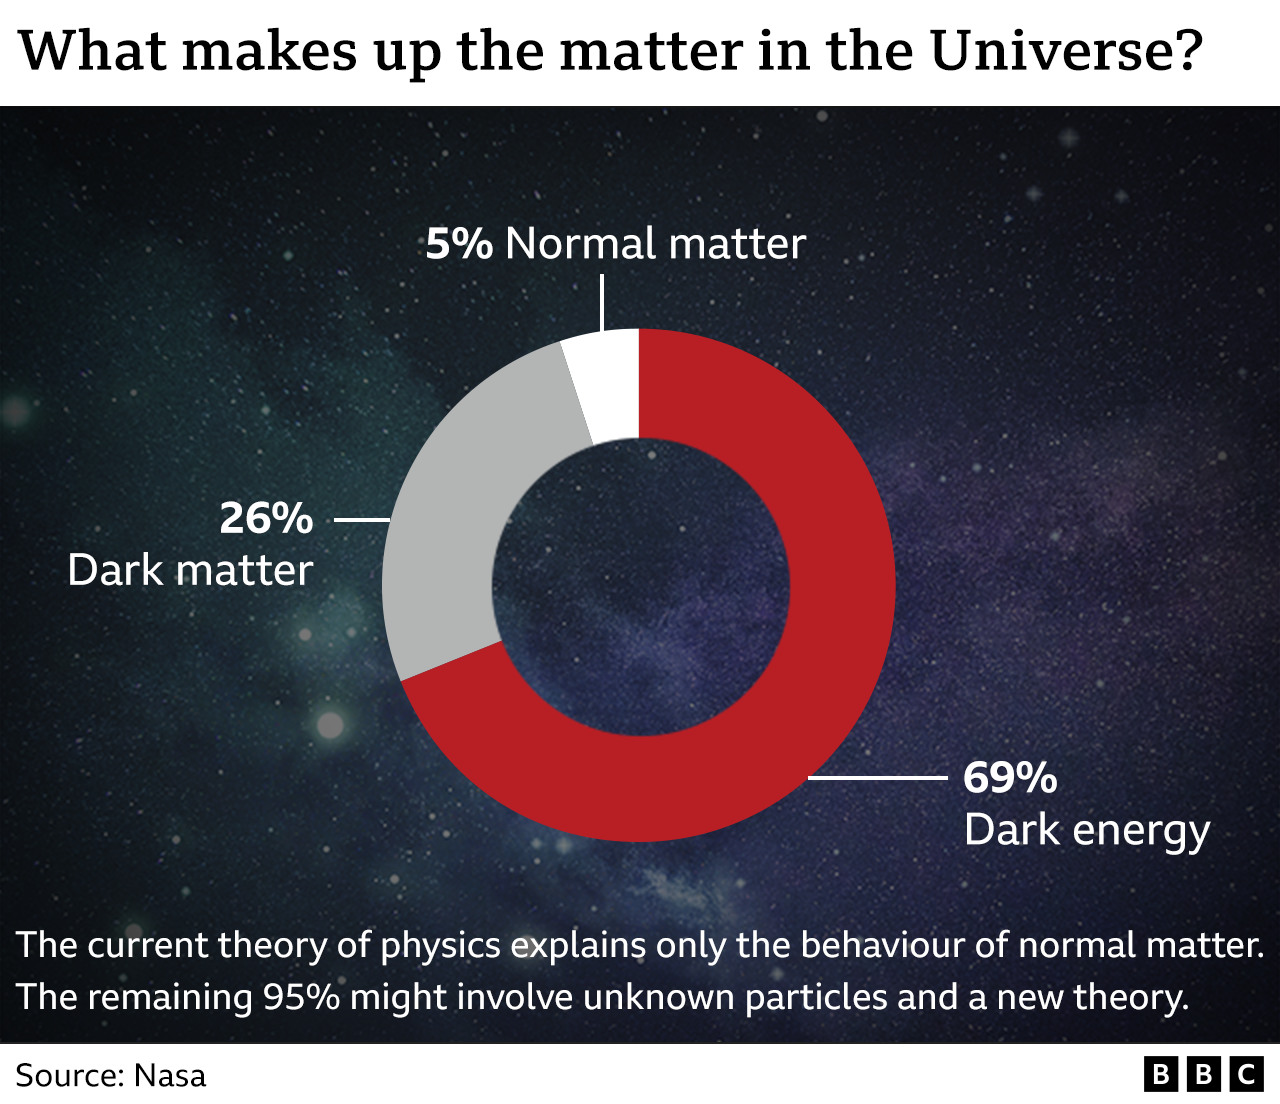 Graphic illustrating the distribution of matter in the Universe - 26% dark matter, 69% dark energy and 5% normal matter